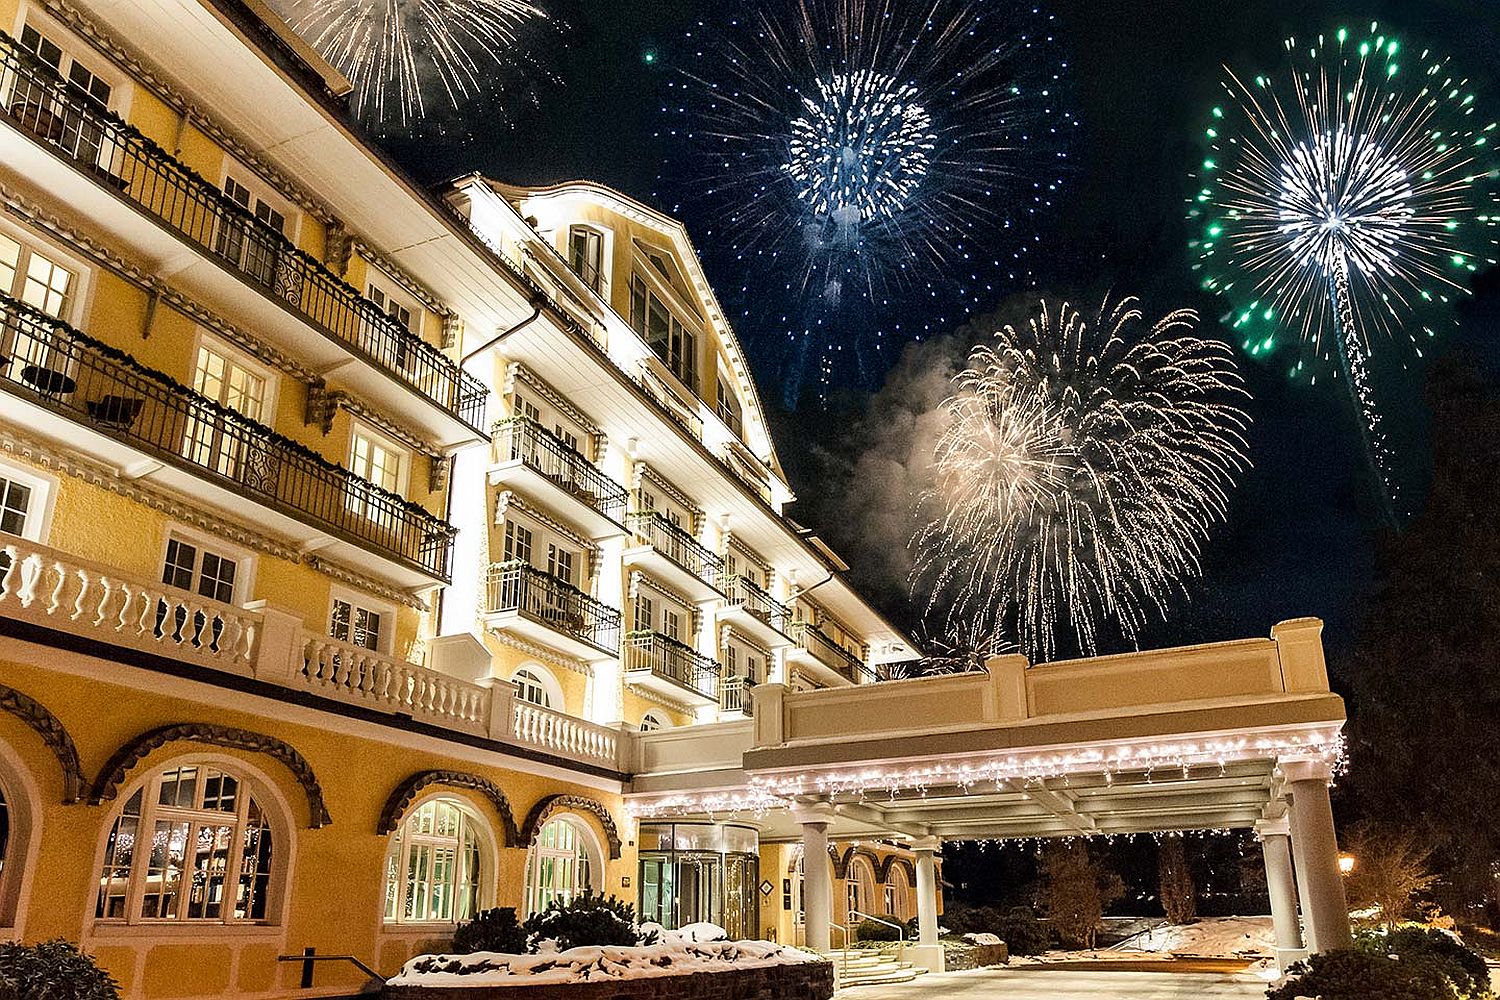 Celebrate this festive season at arguably the most luxurious hotel in Gstaad, Switzerland